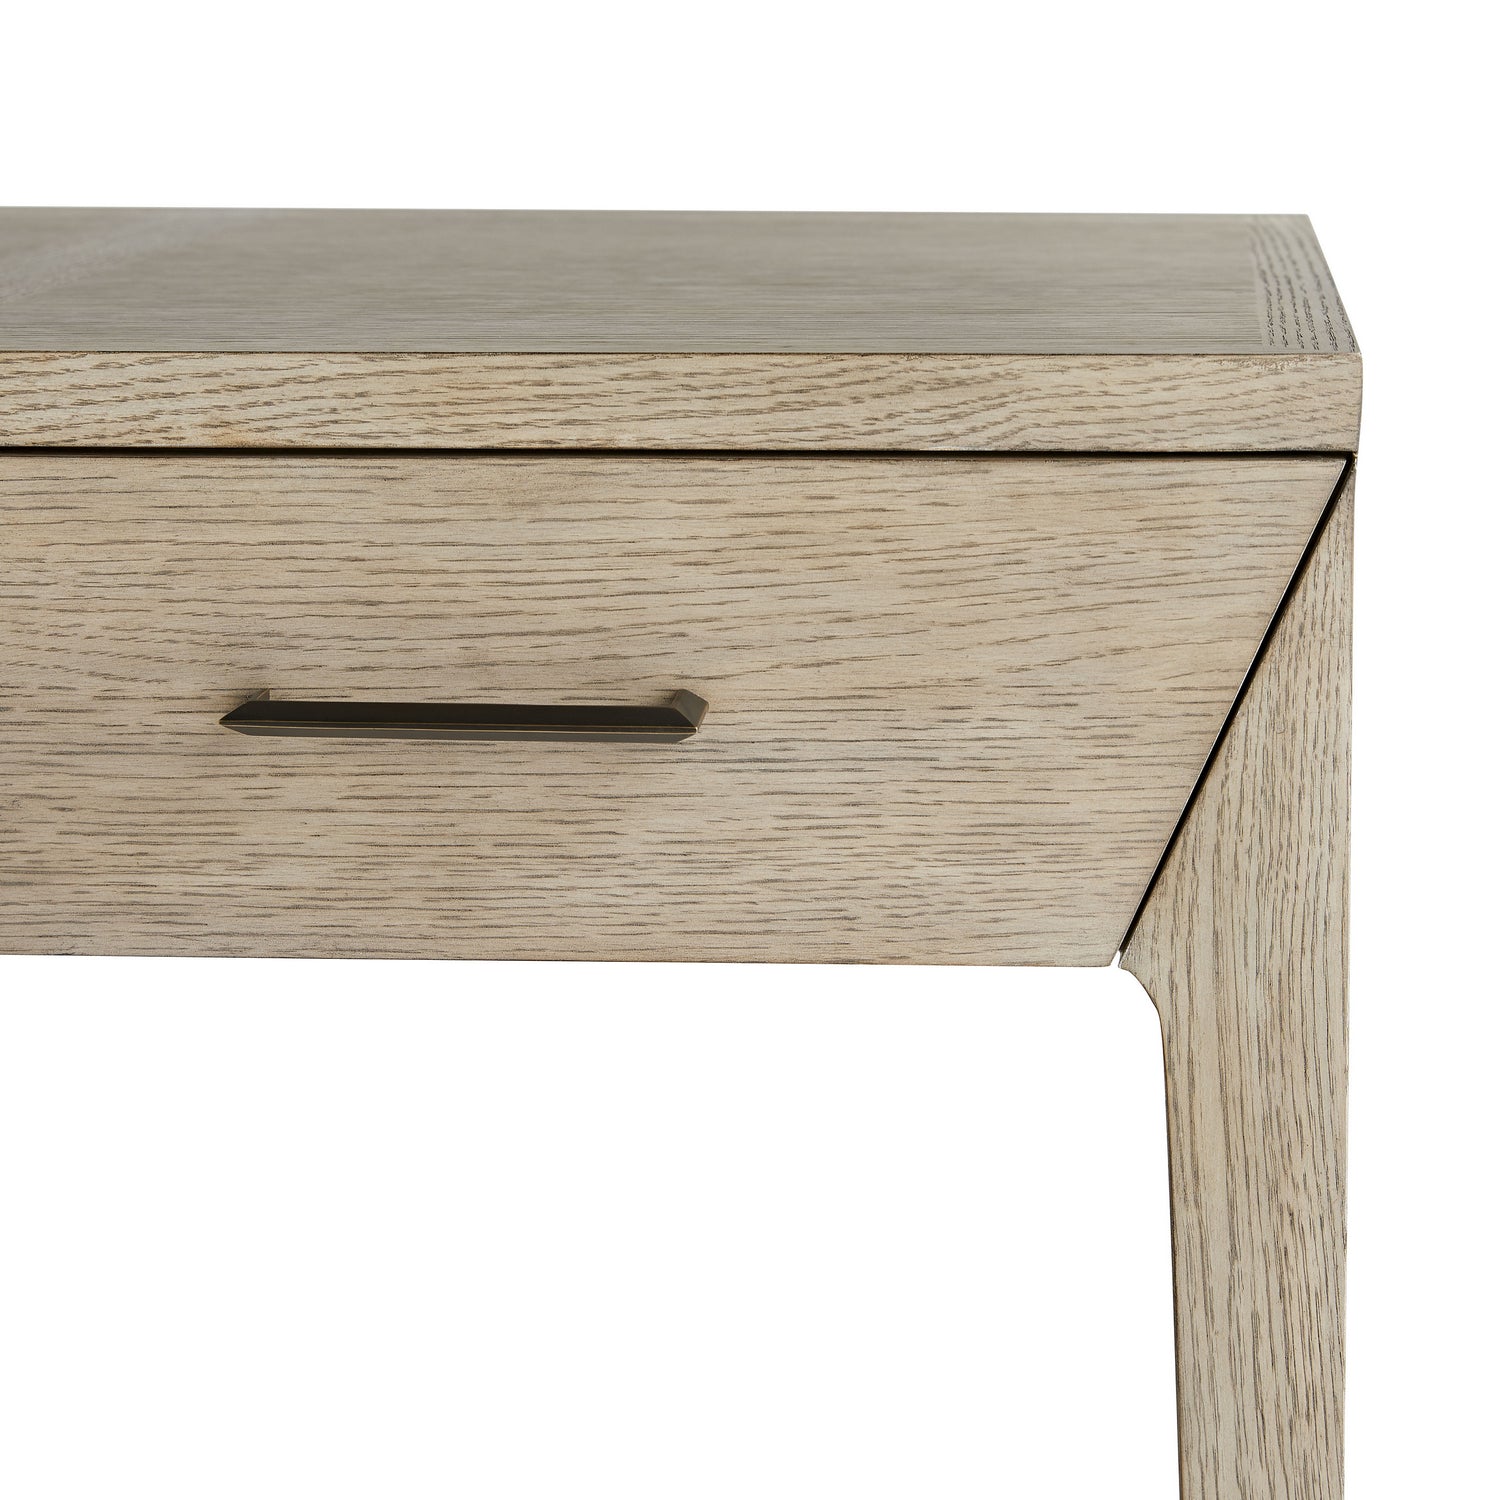 Desk from the Dublin collection in Smoke finish